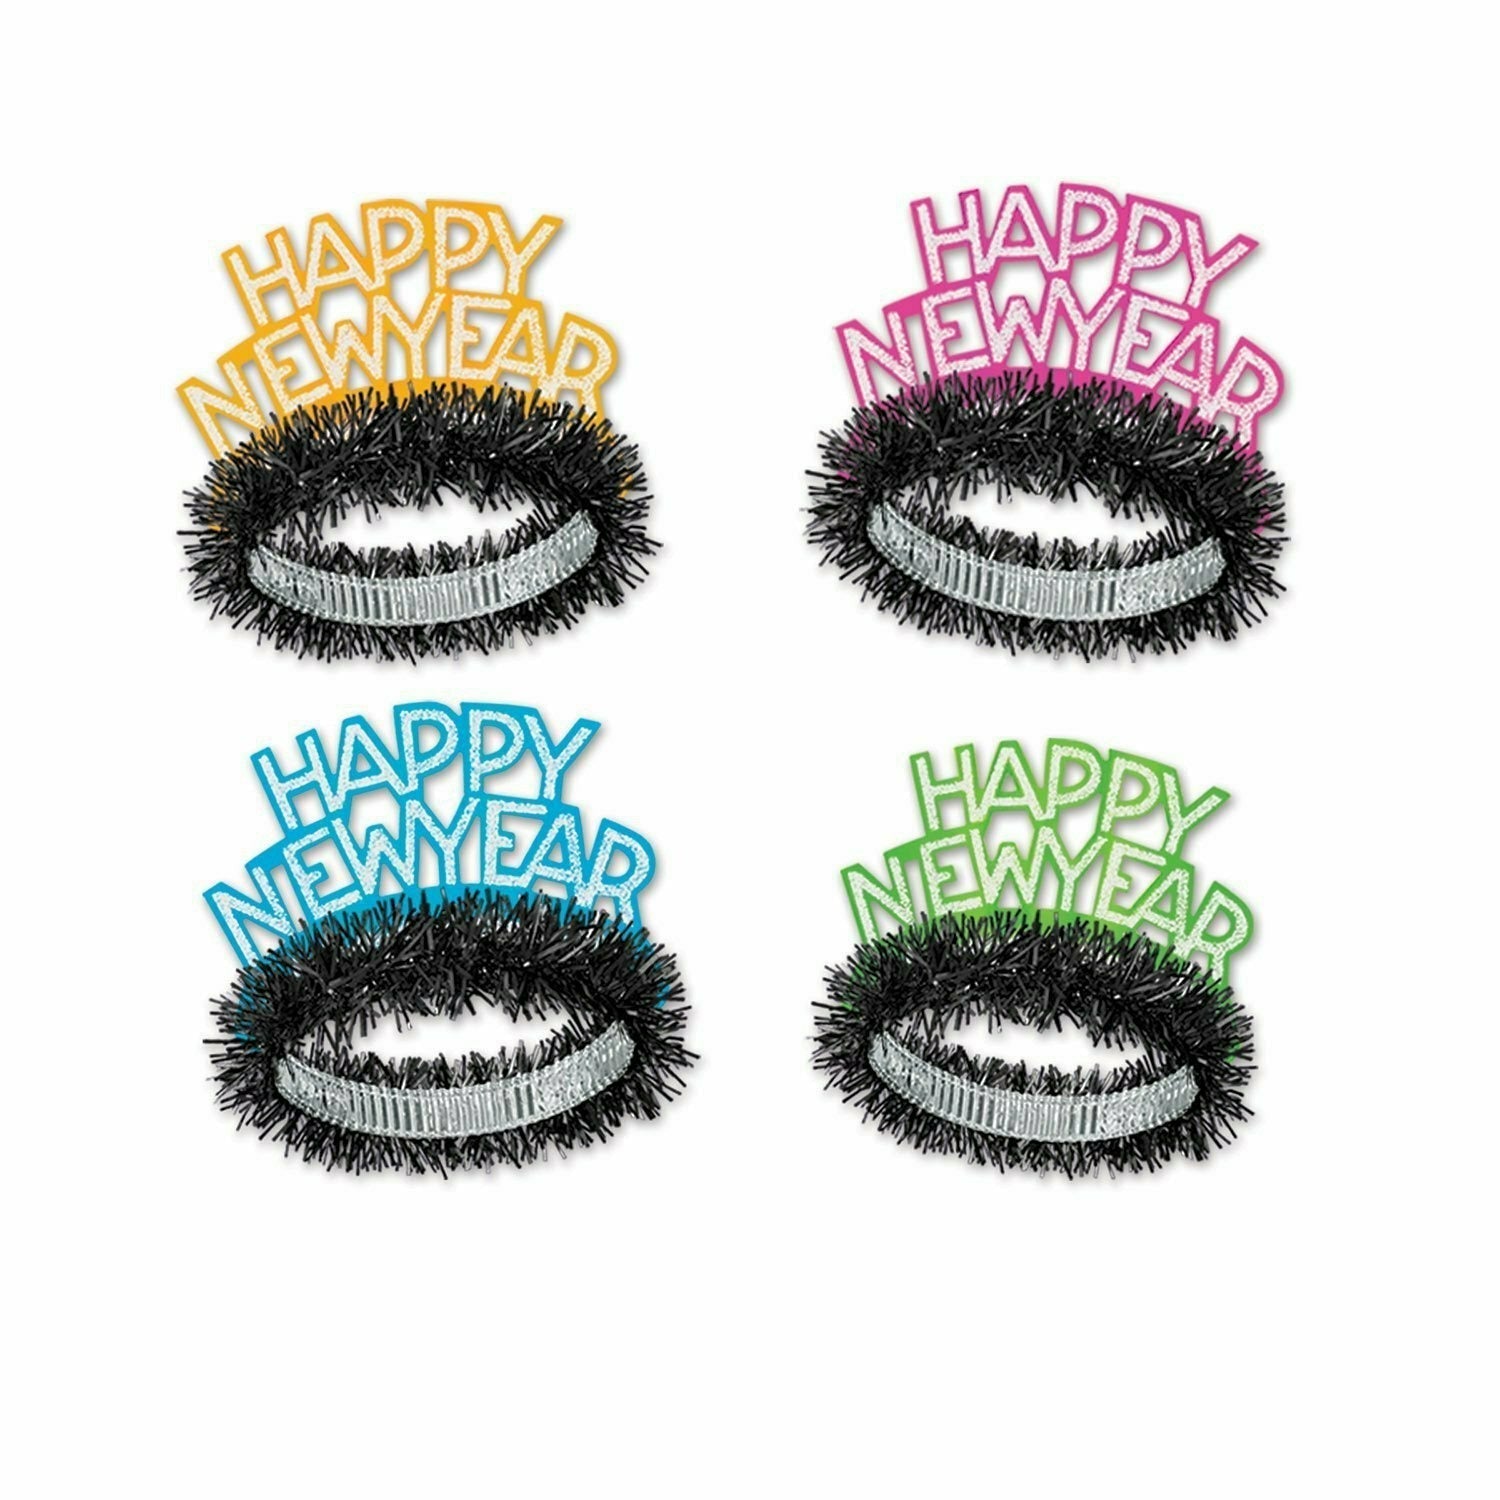 Ultimate Party Super Stores HOLIDAY: NEW YEAR'S Happy New Year Tiara